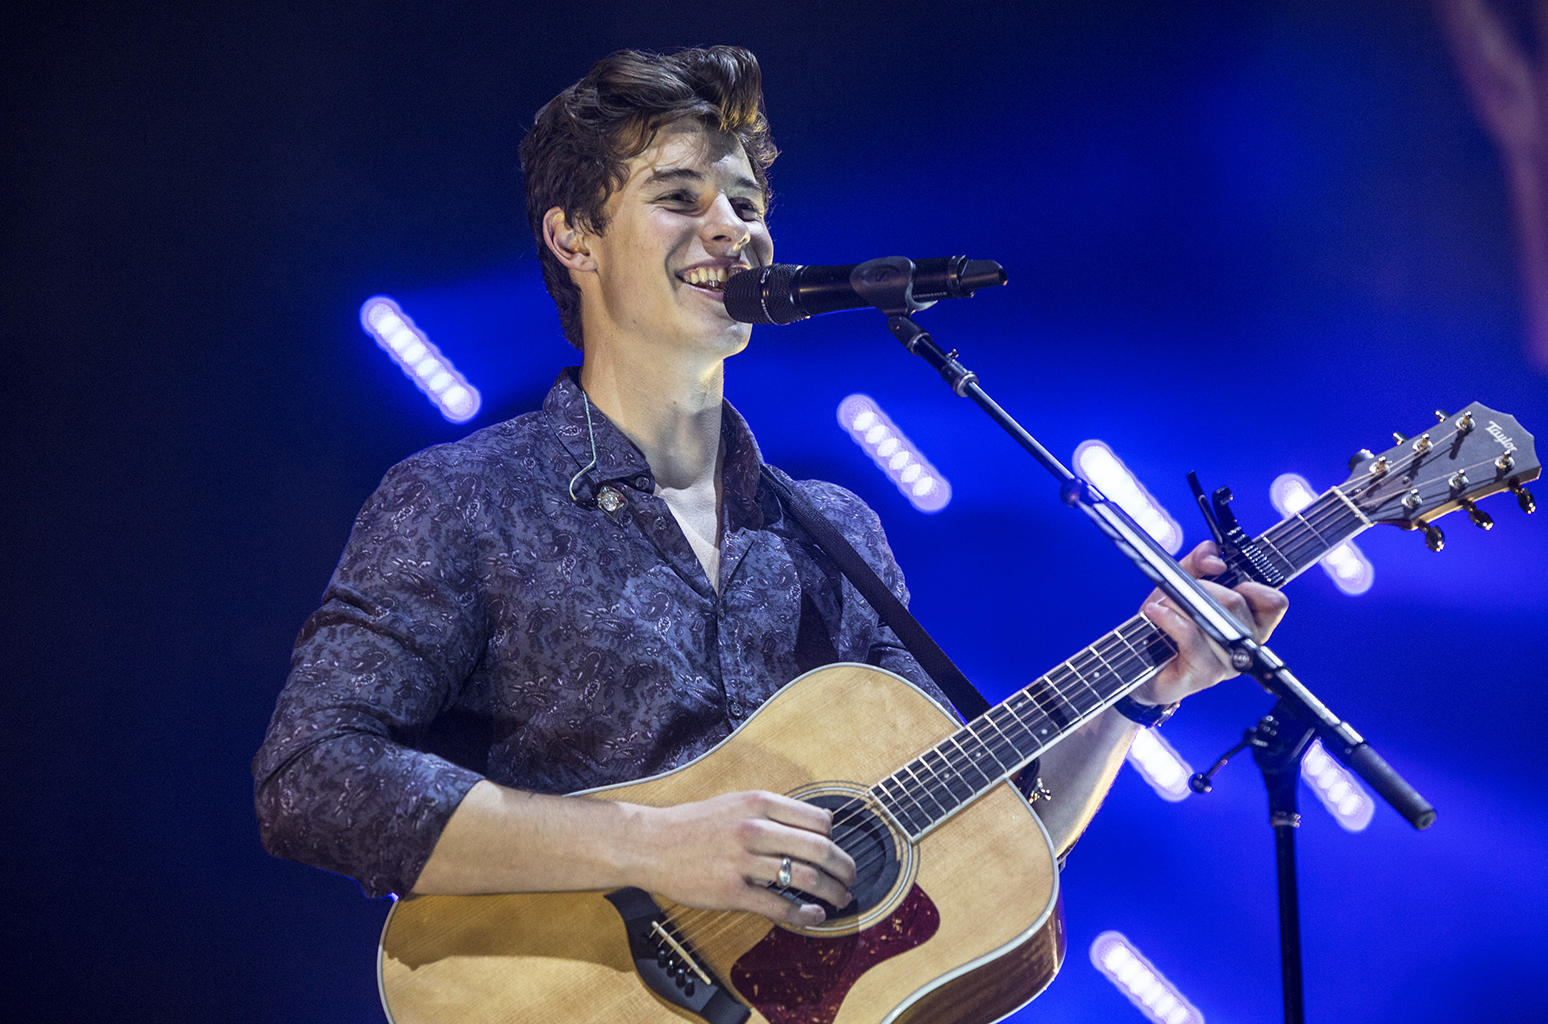 Build Your Dream Boyband and We’ll Reward You With a Hot Rock Star Boyfriend Shawn Mendes singer